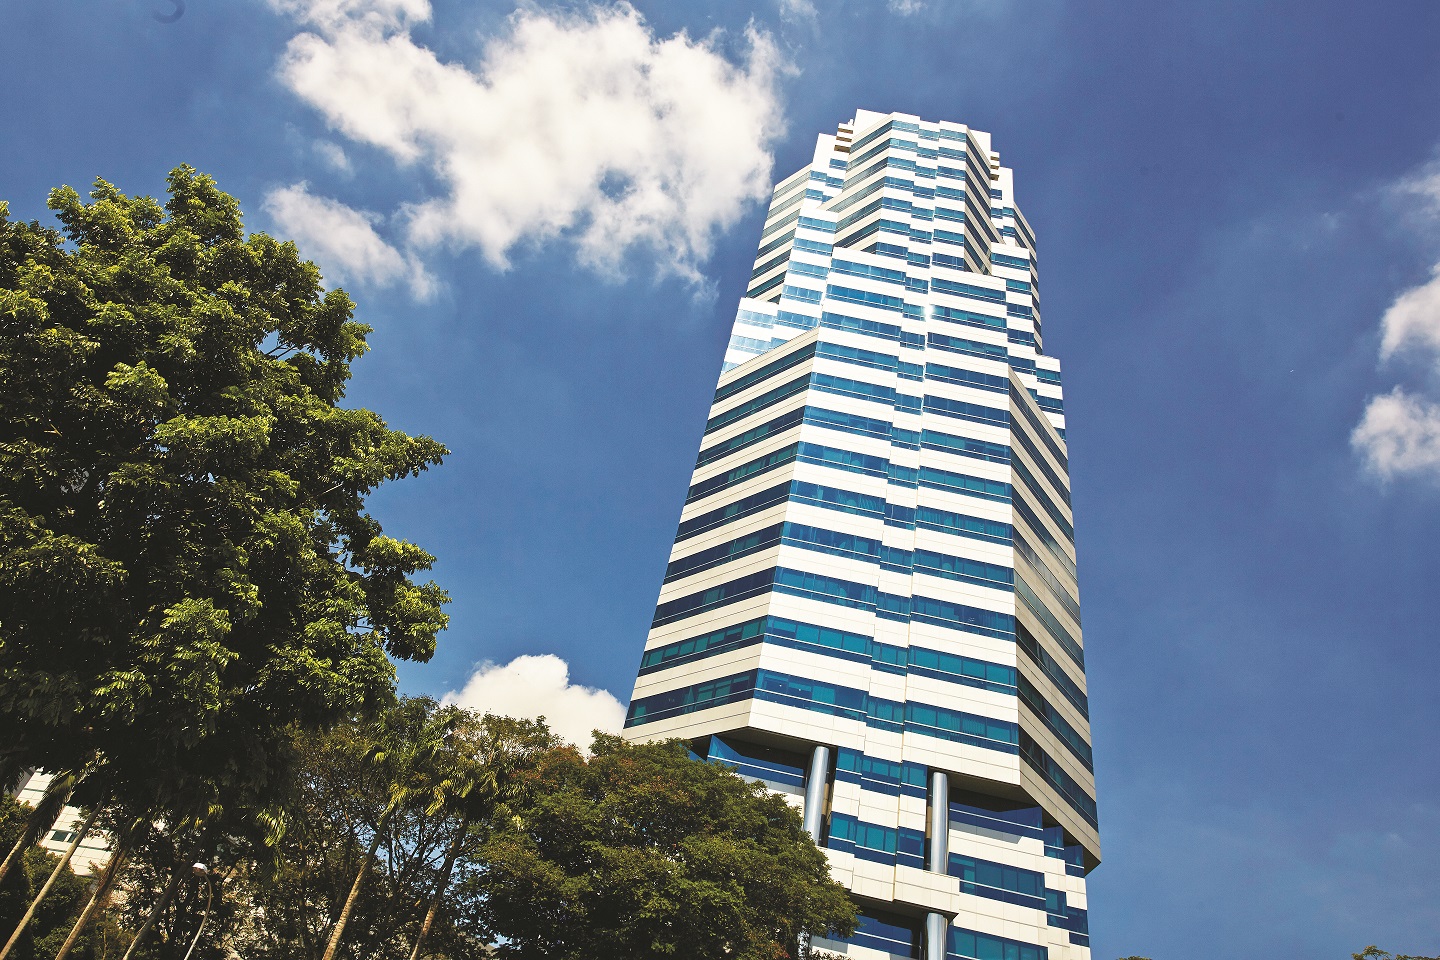 This is not the first accolade for the 24-storey Alexandra Point. The property was also awarded the BCA Green Mark Platinum Award in 2014.